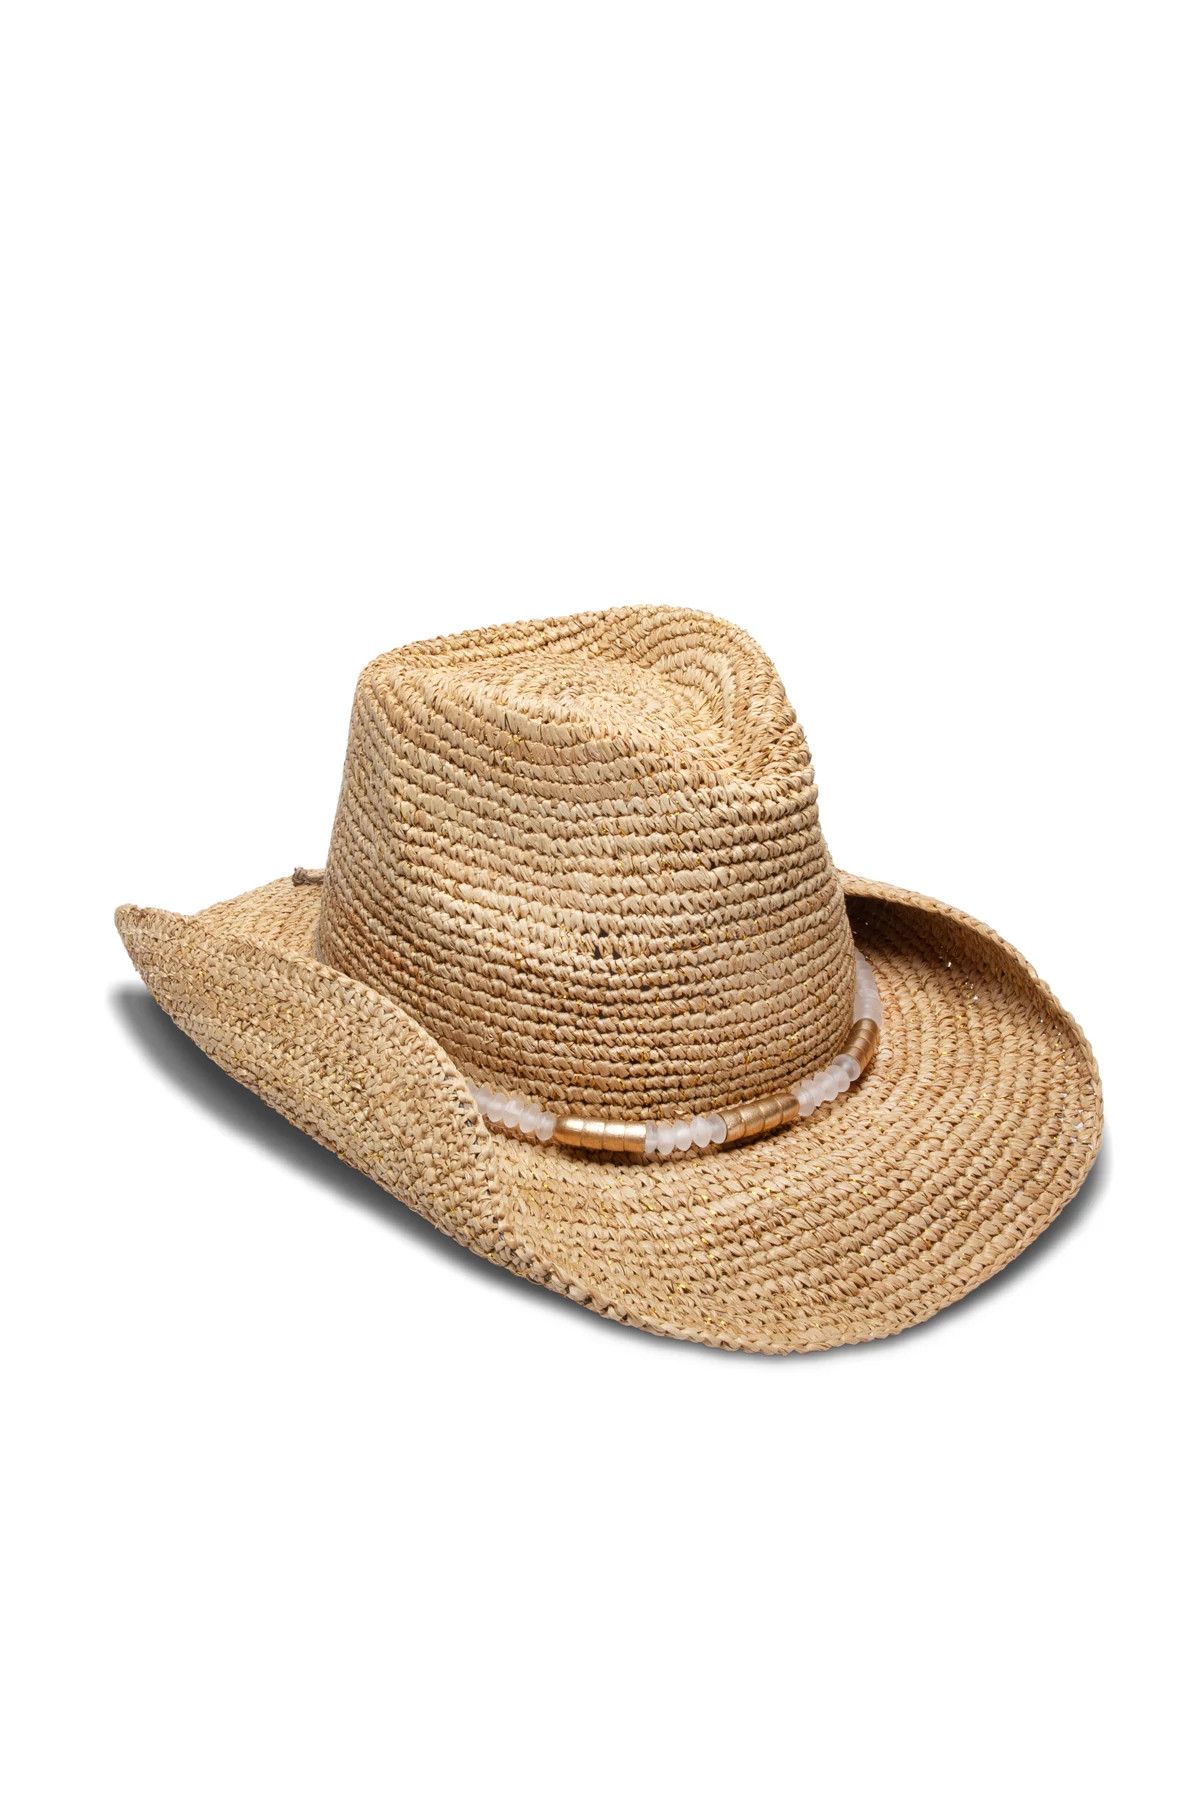 Chrysta Cowboy Sun Hat | Everything But Water